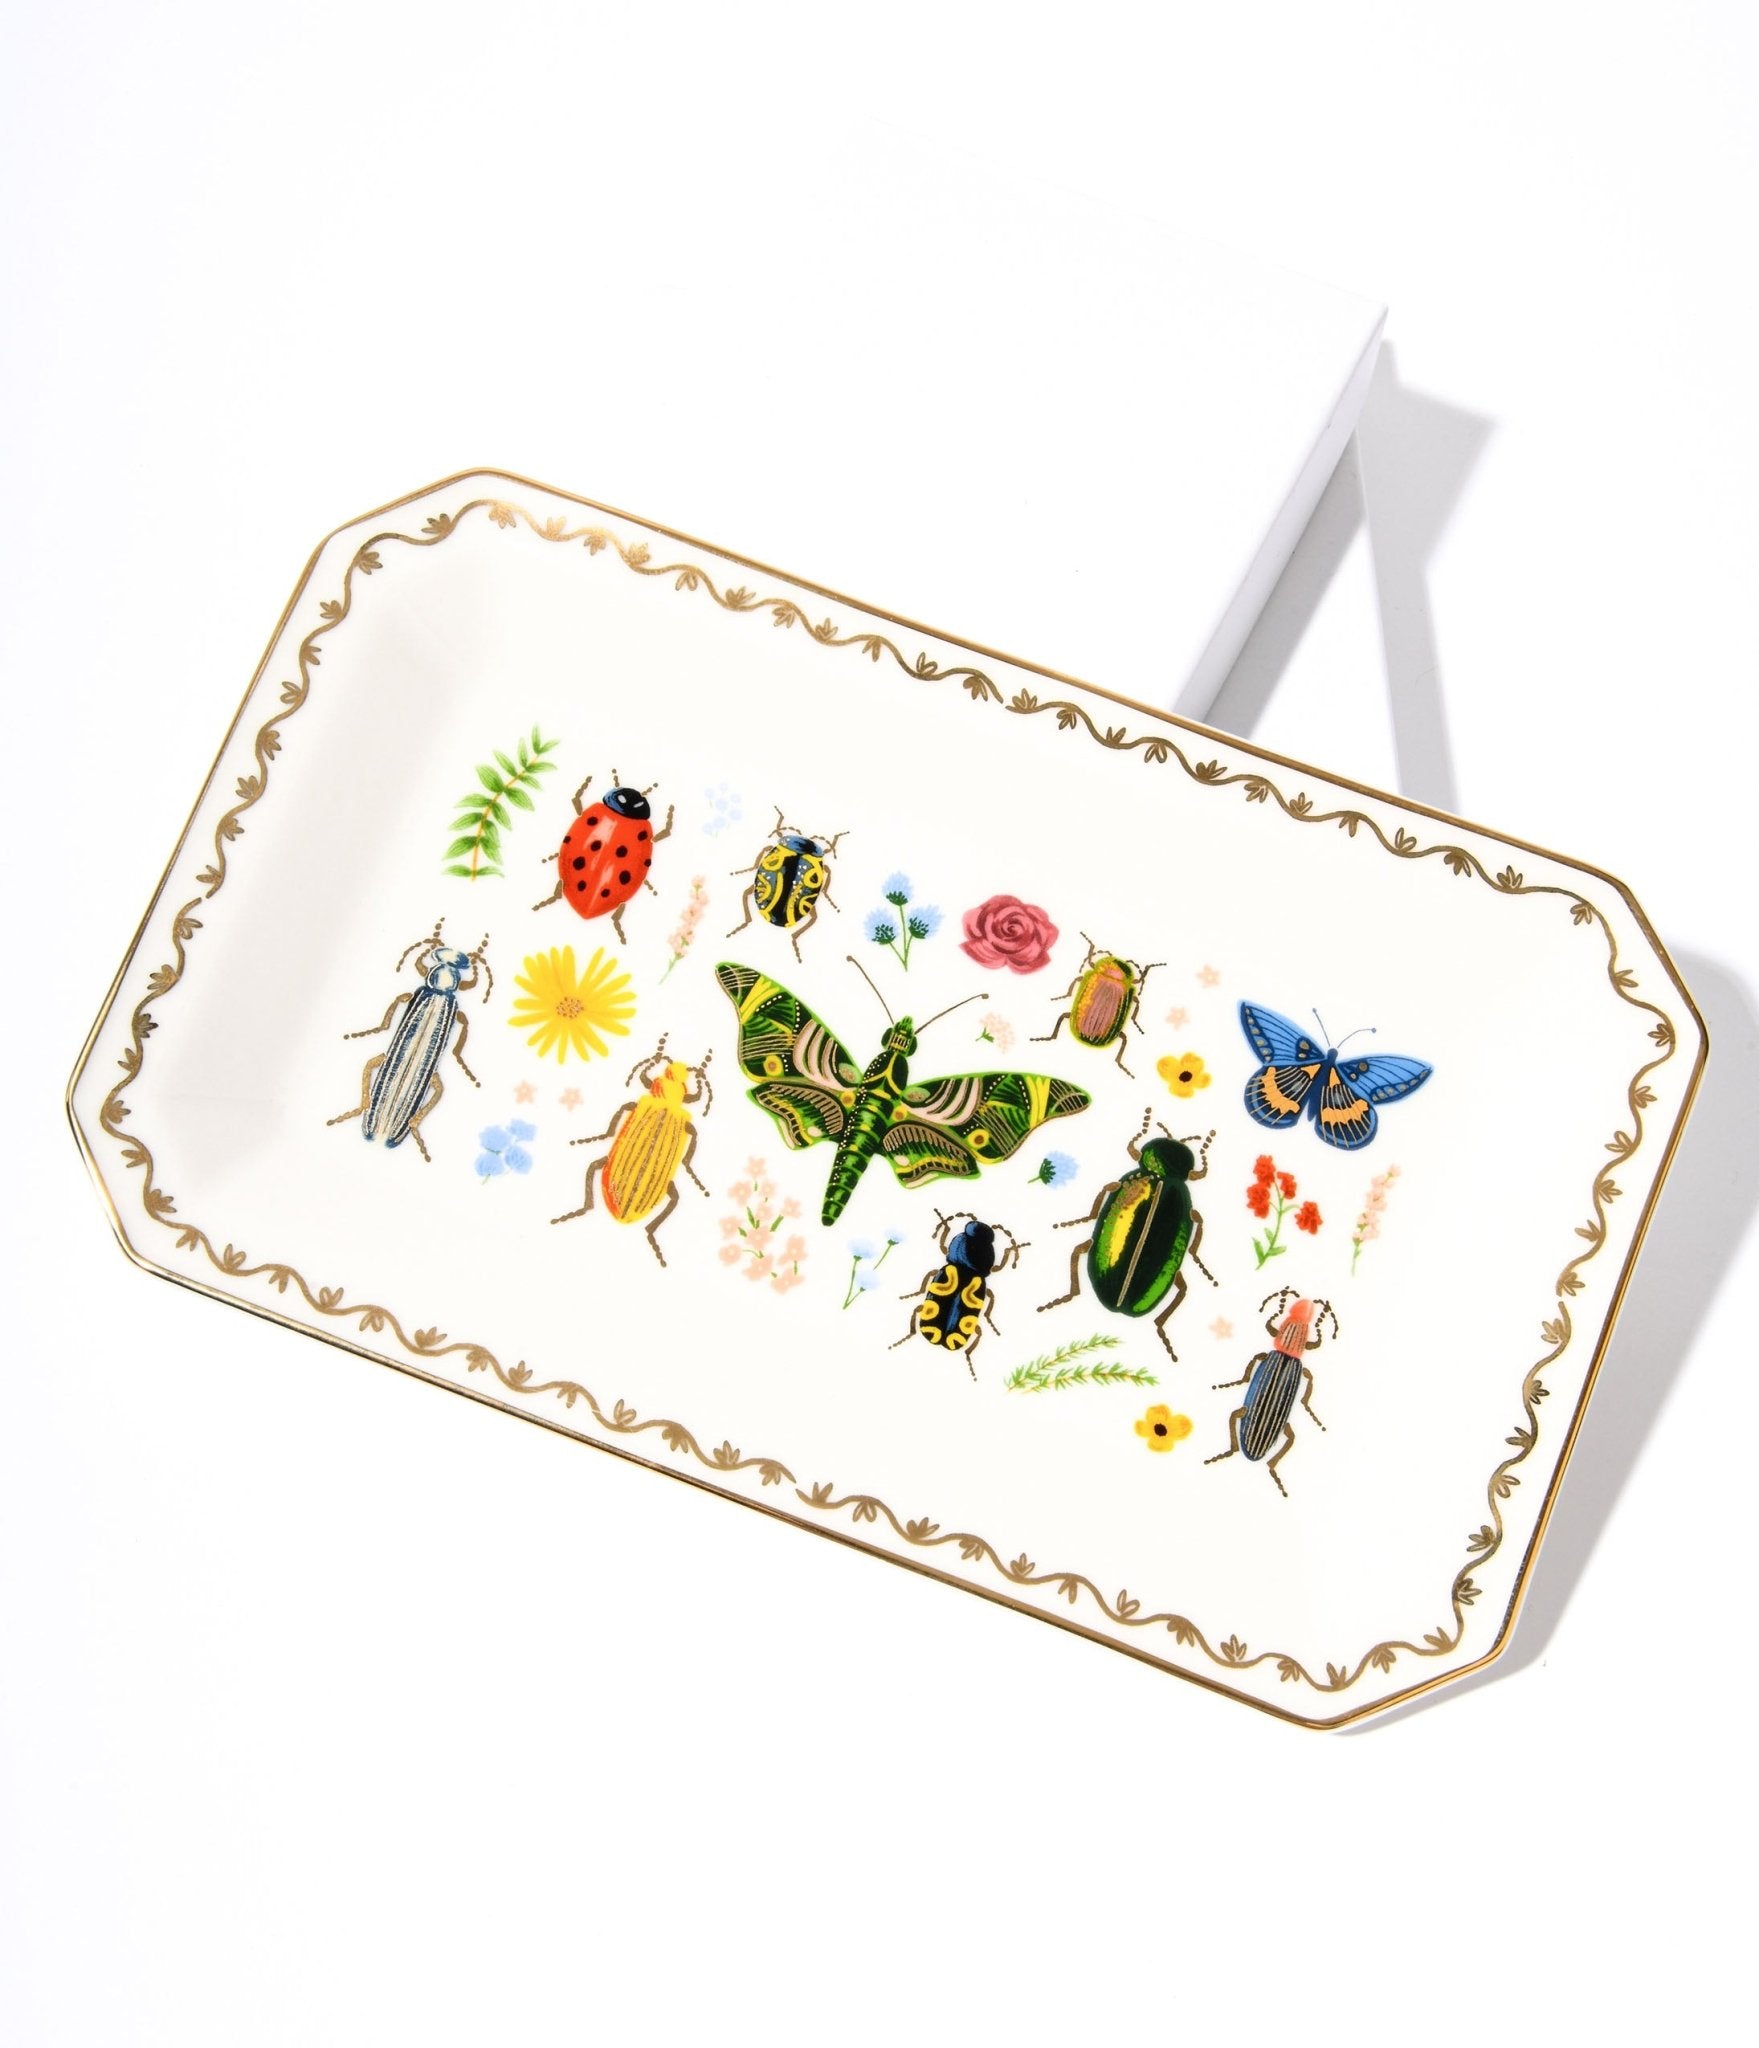 

Ivory & Gold Garden Porcelain Catchall Tray